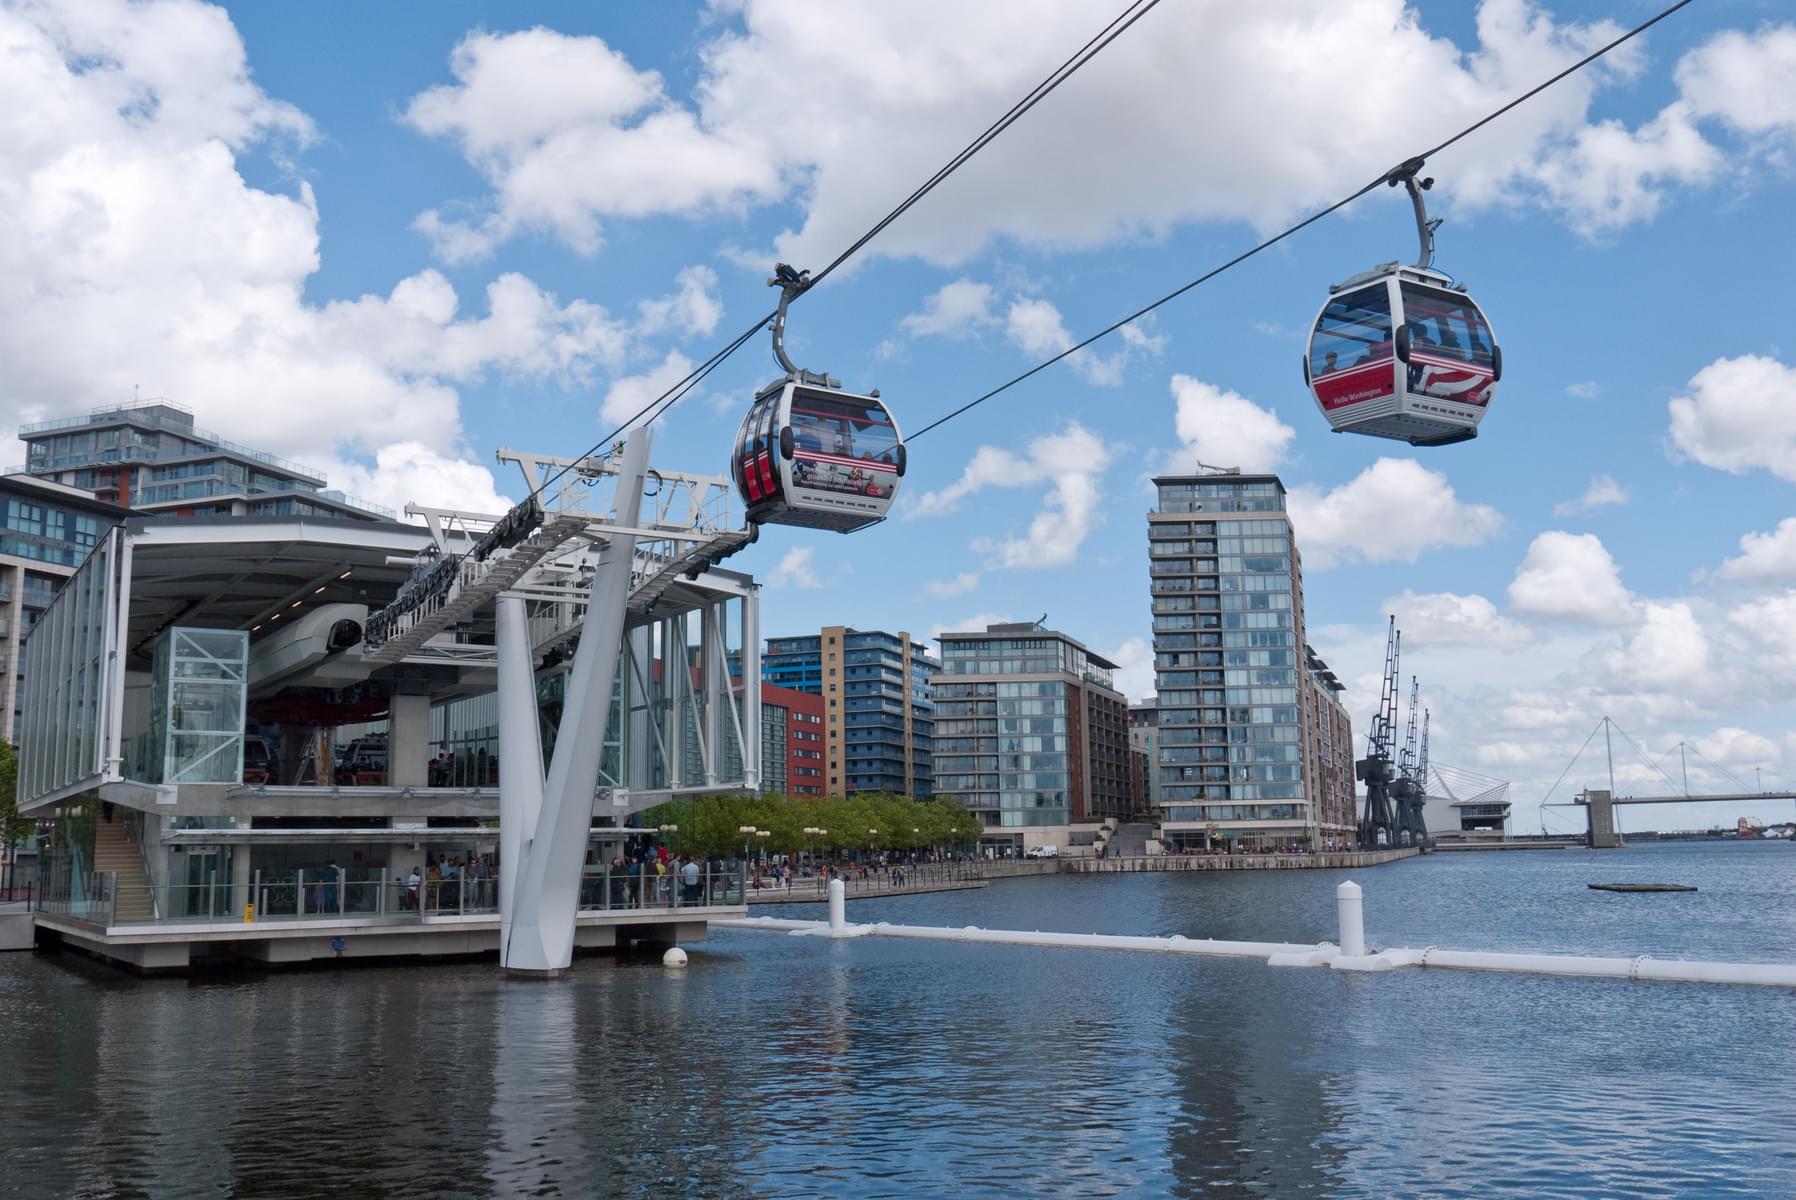 Highlights of Emirates Cable Car